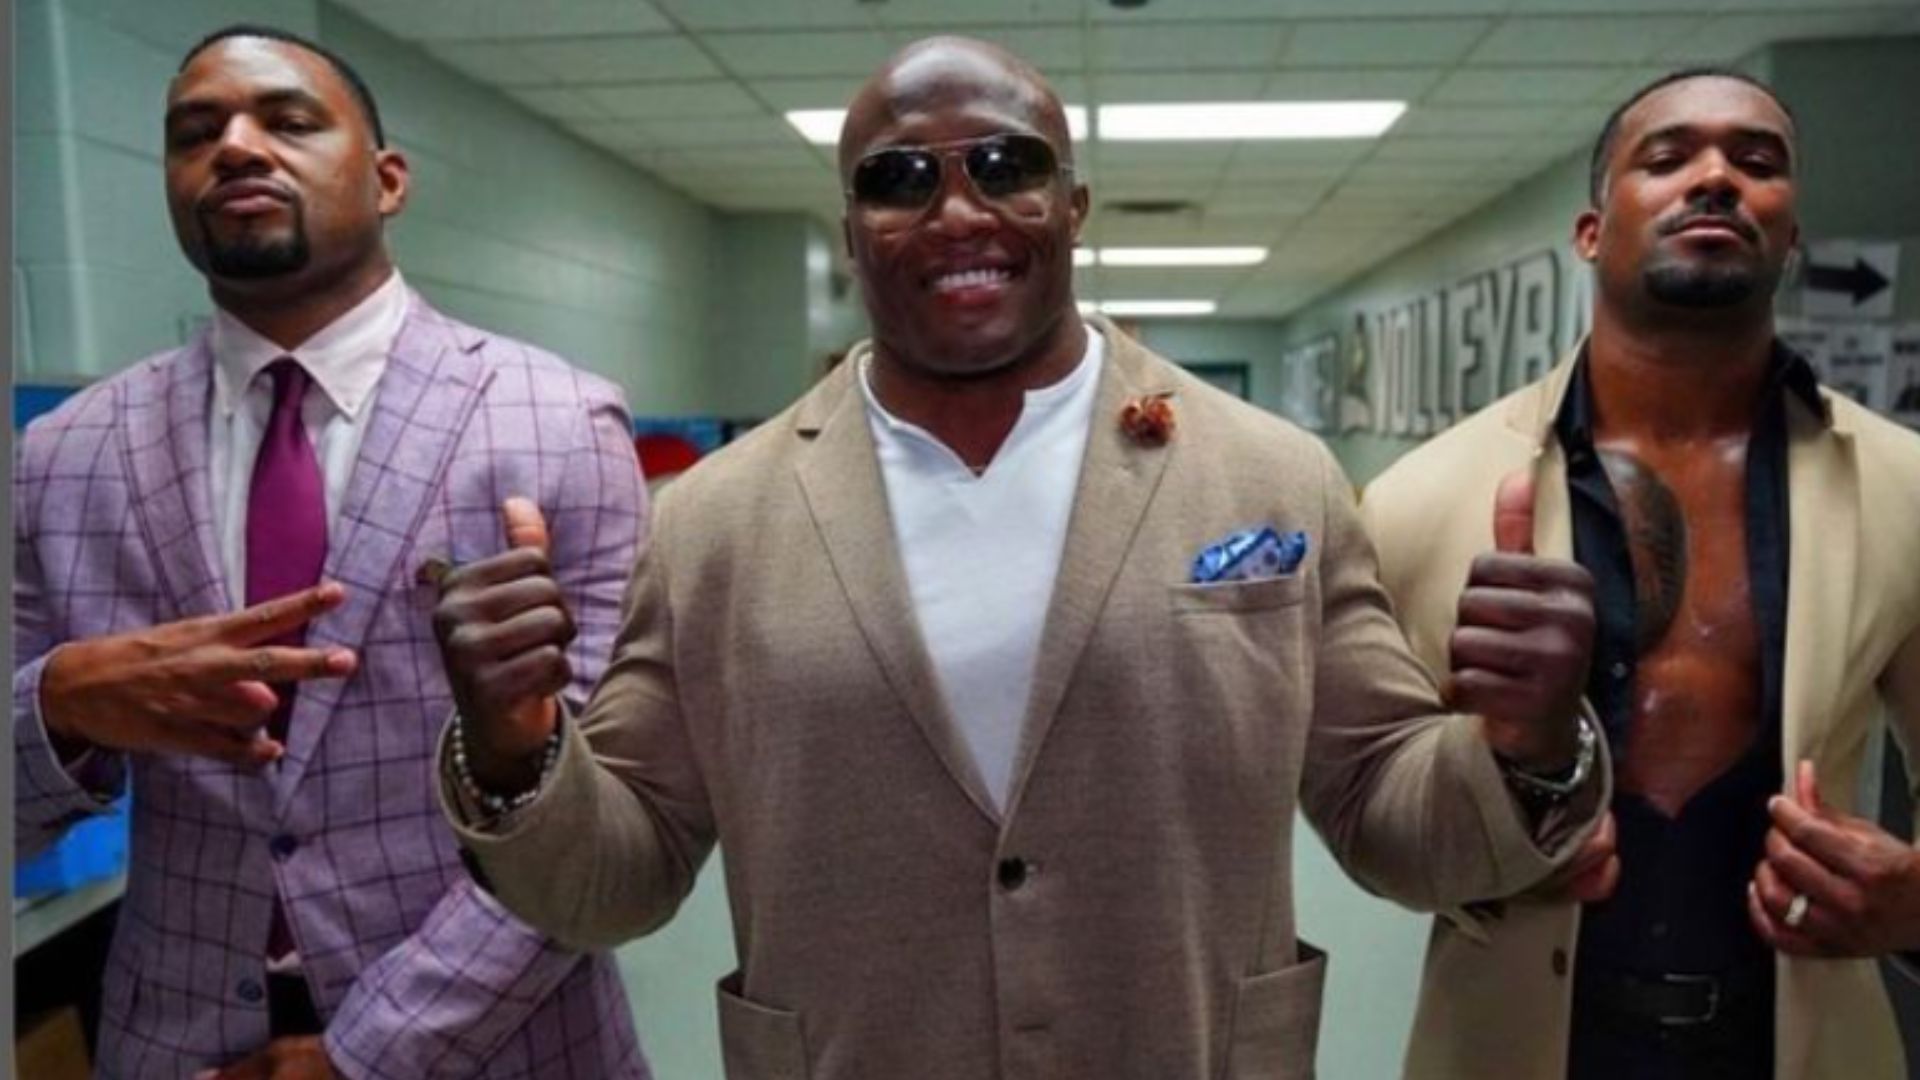 Bobby Lashley along with Angelo Dawkins and Montez Ford